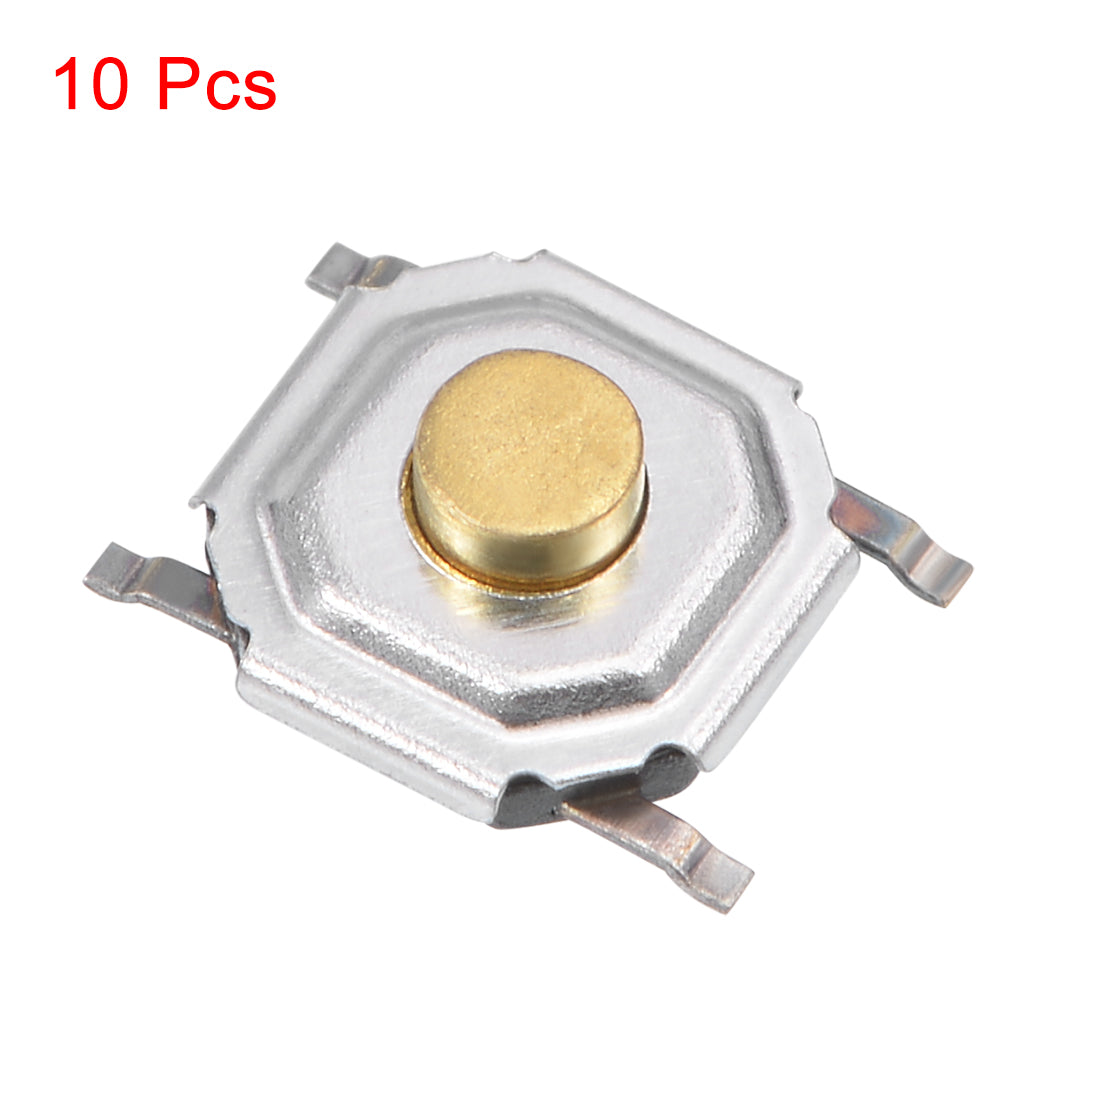 uxcell Uxcell 10PCS 5x5x2mm Momentary Panel PCB Surface Mounted Devices SMT Mount 4 Pins Push Button SPST Tactile Tact Switch